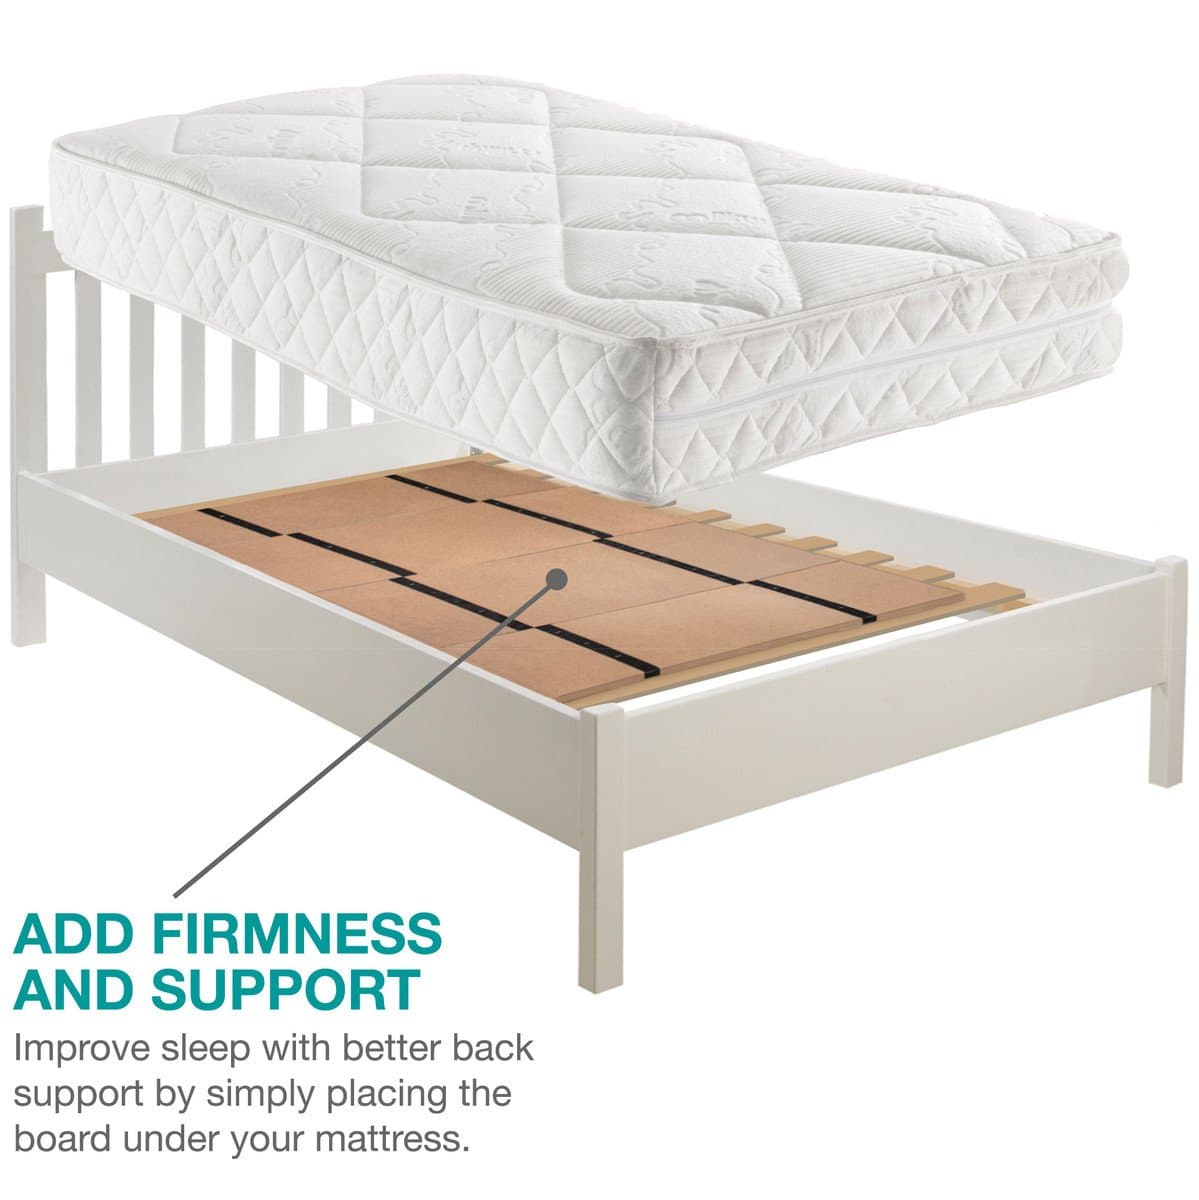 DMI Folding Bed Boards for Mattress Support - Senior.com Bedroom Accessories